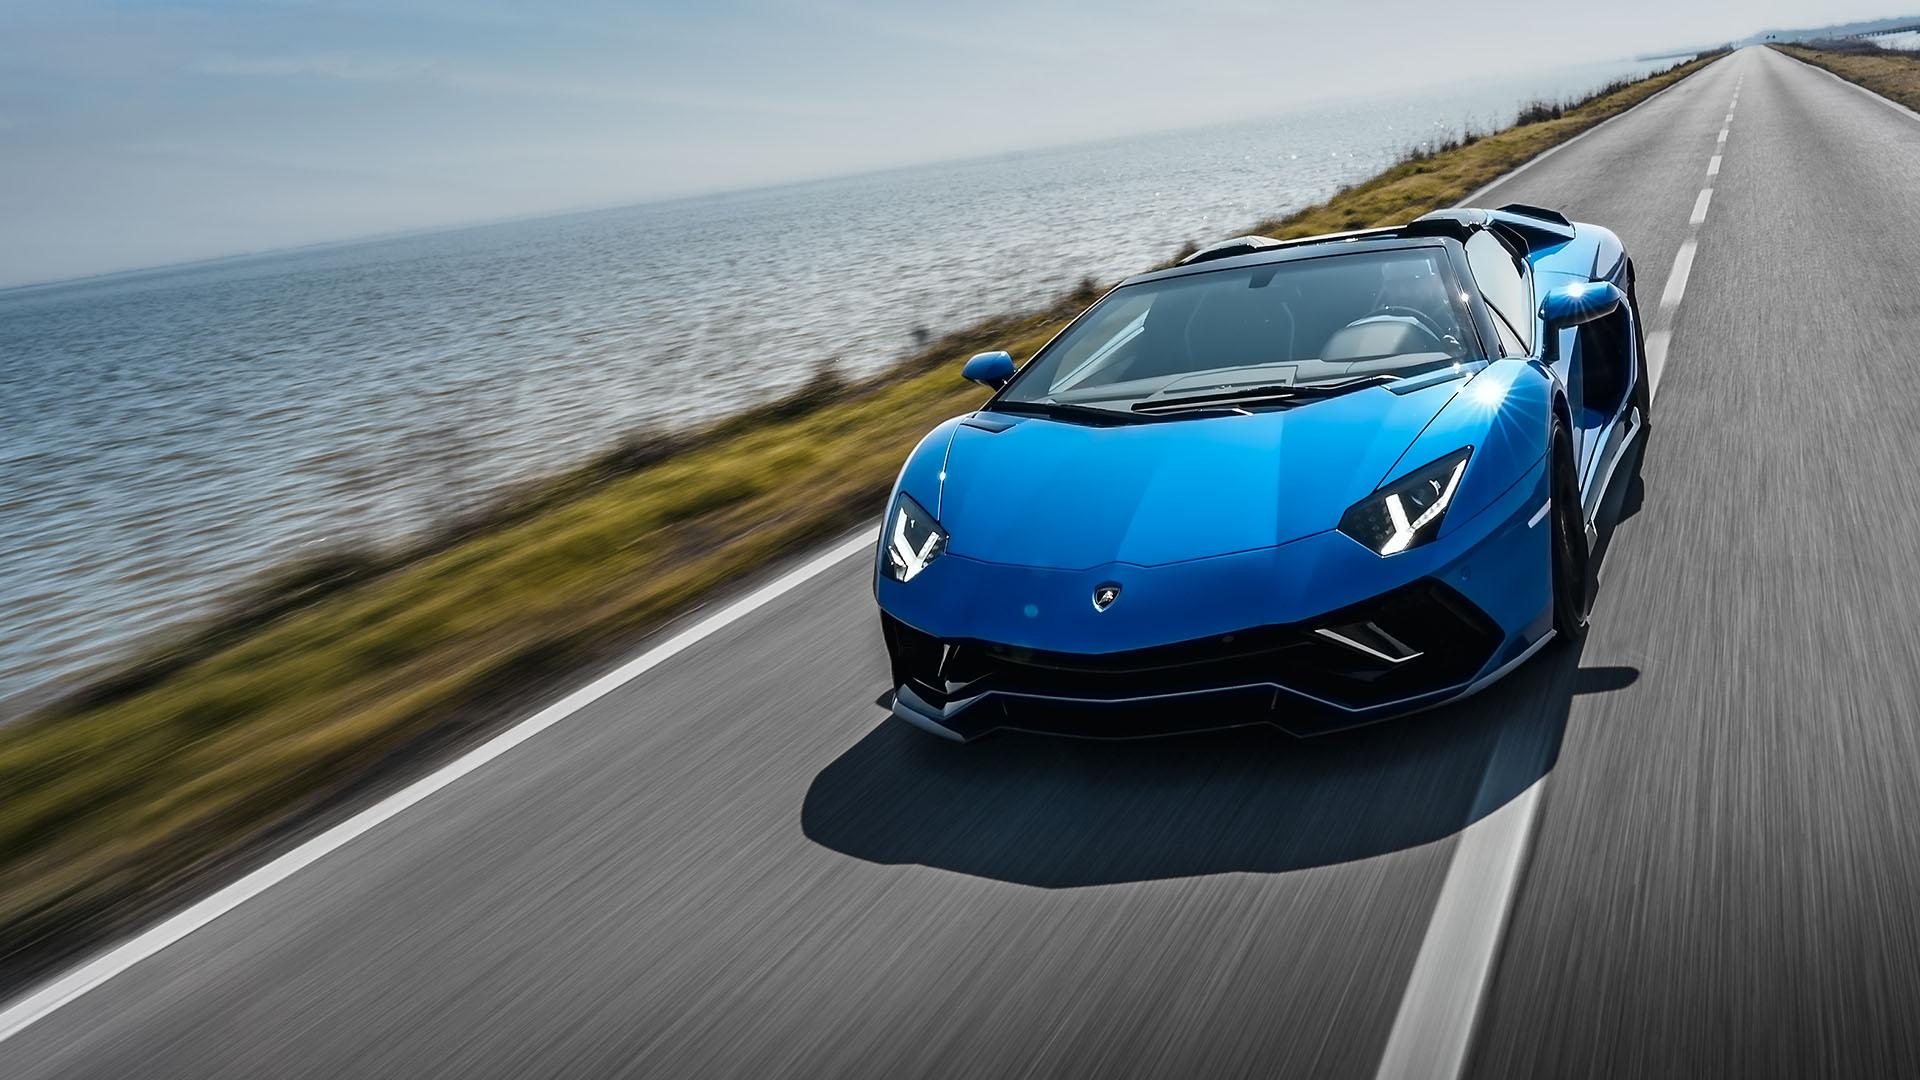 Aventador ultimae on the road 3